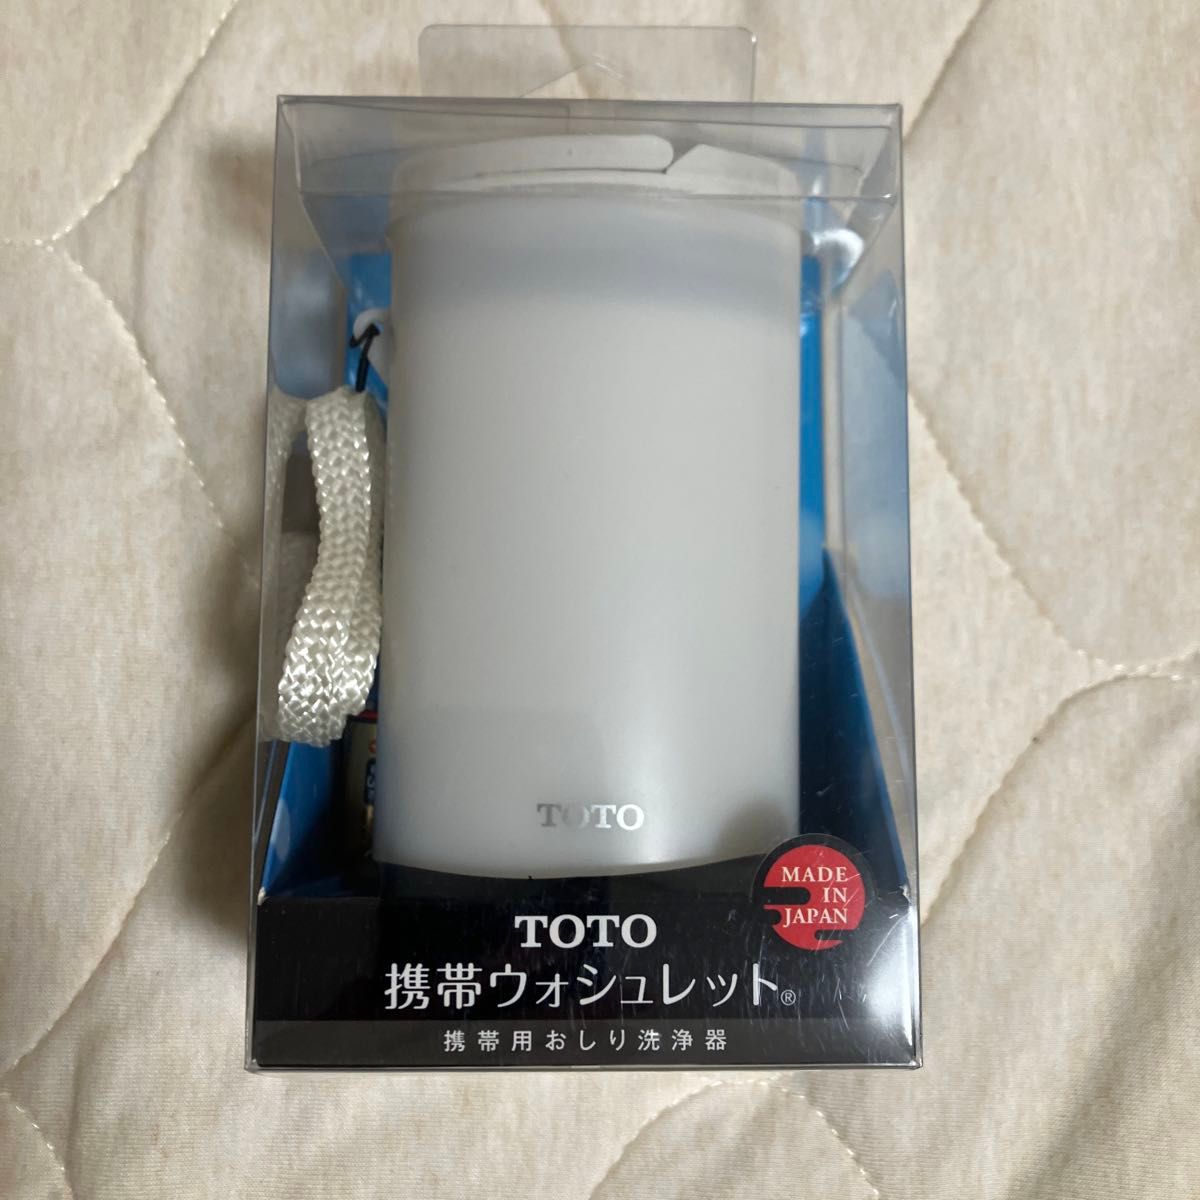 TOTO 携帯ウォシュレット YEW4R2